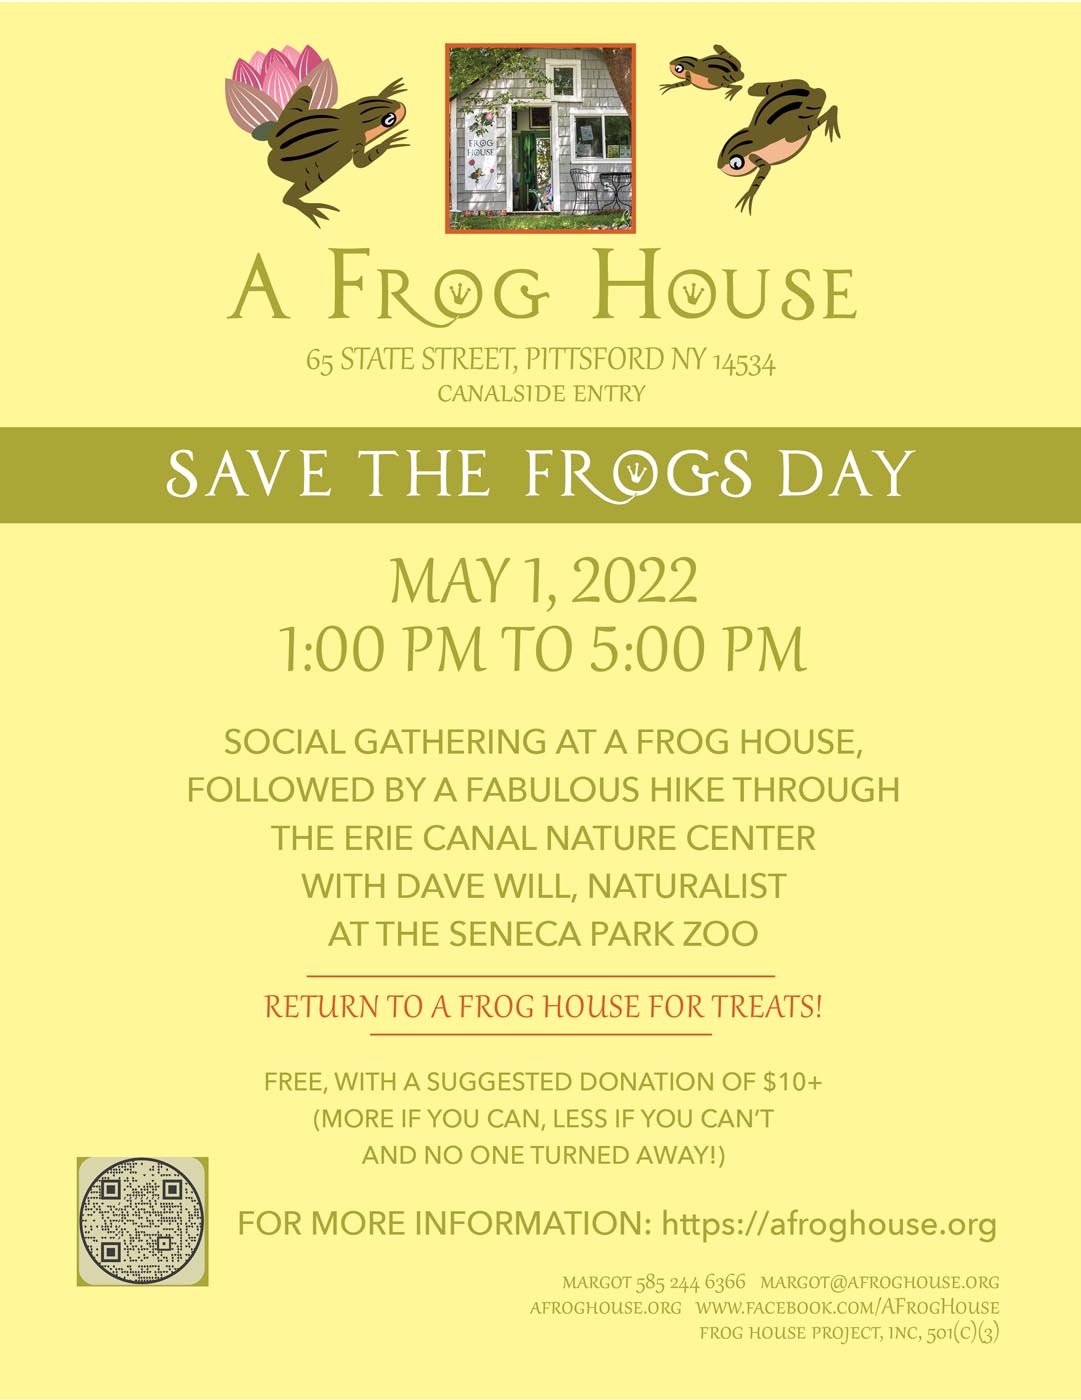 A Frog House Save the Frogs Day 2022 Flyer